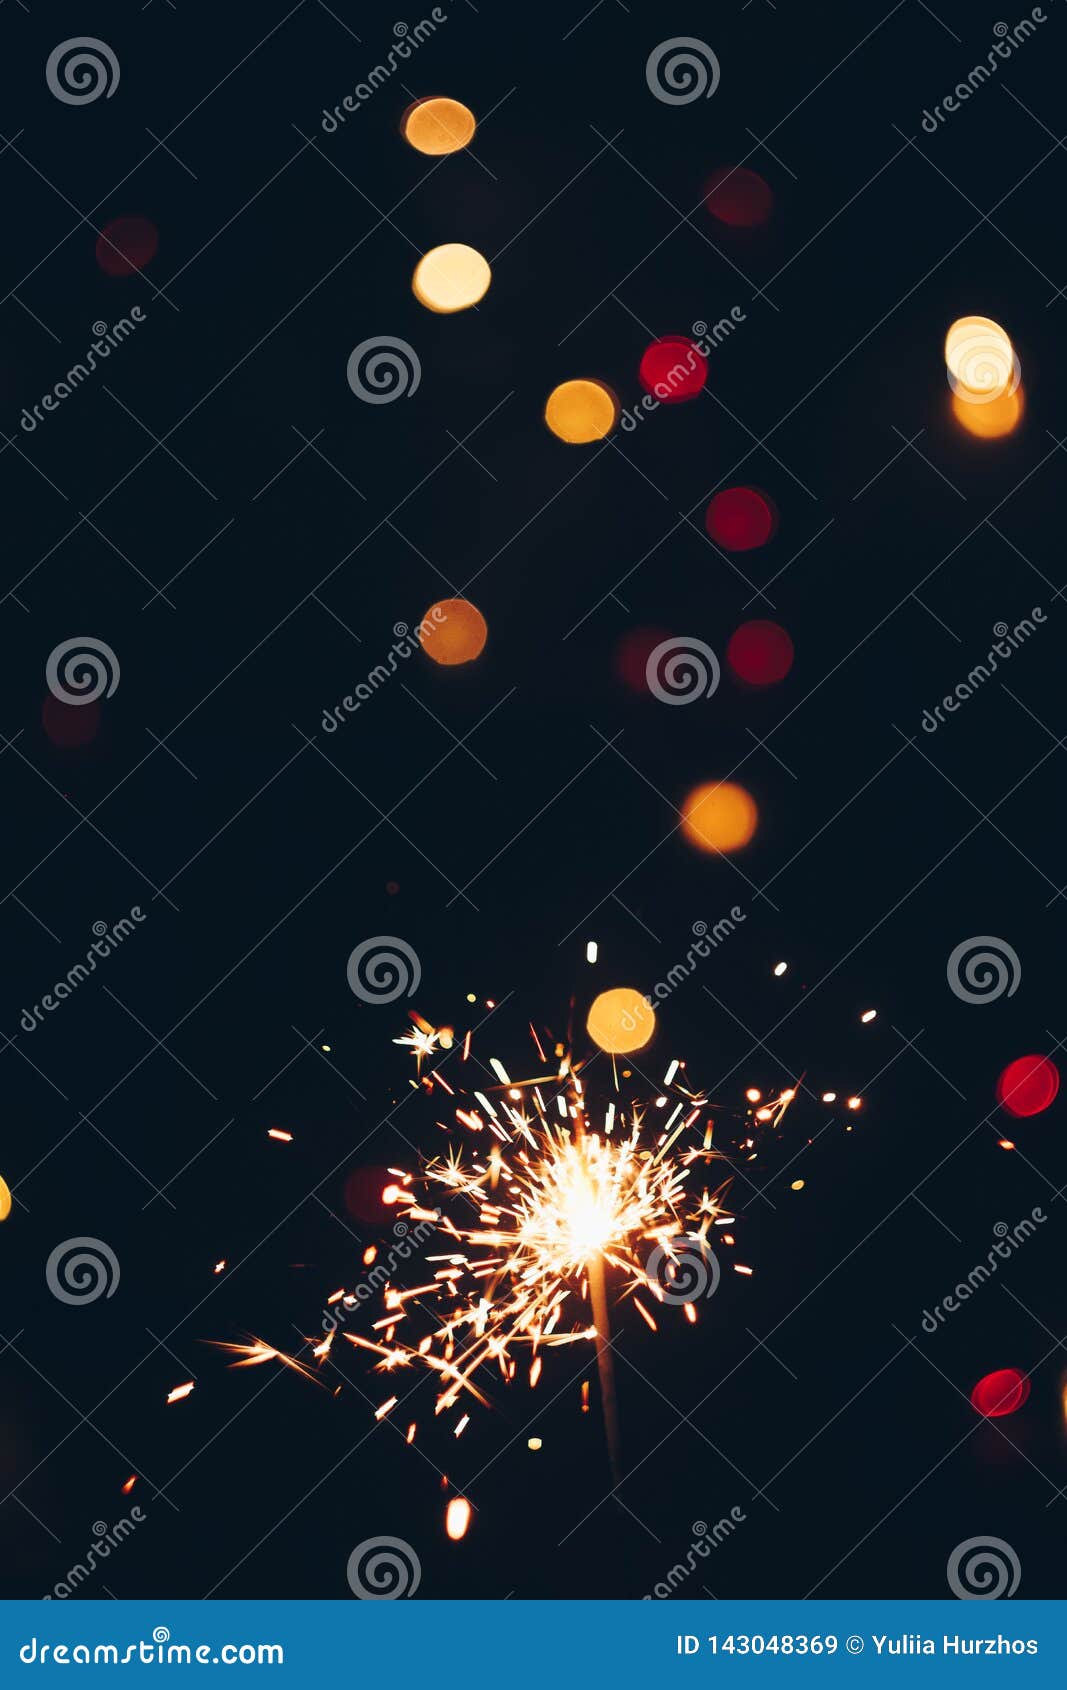 Sparkling Bengal Sparklers Sticks In Flames On A Black Background With